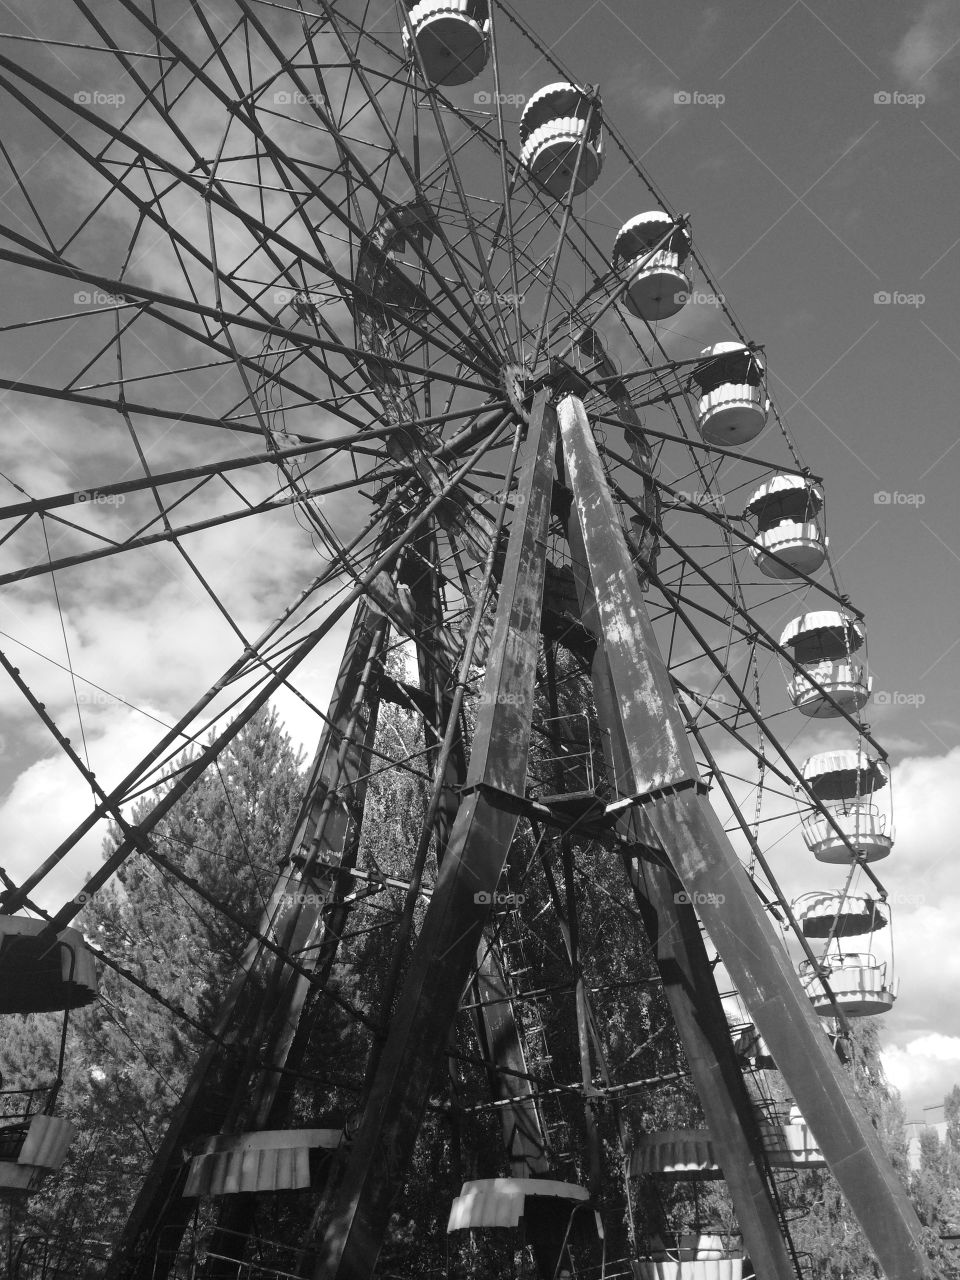 Abandoned Ferris Wheel. Ferris Wheel in the abandoned city of Pripyat, Ukraine. This city is located within a few miles Chernobyl.